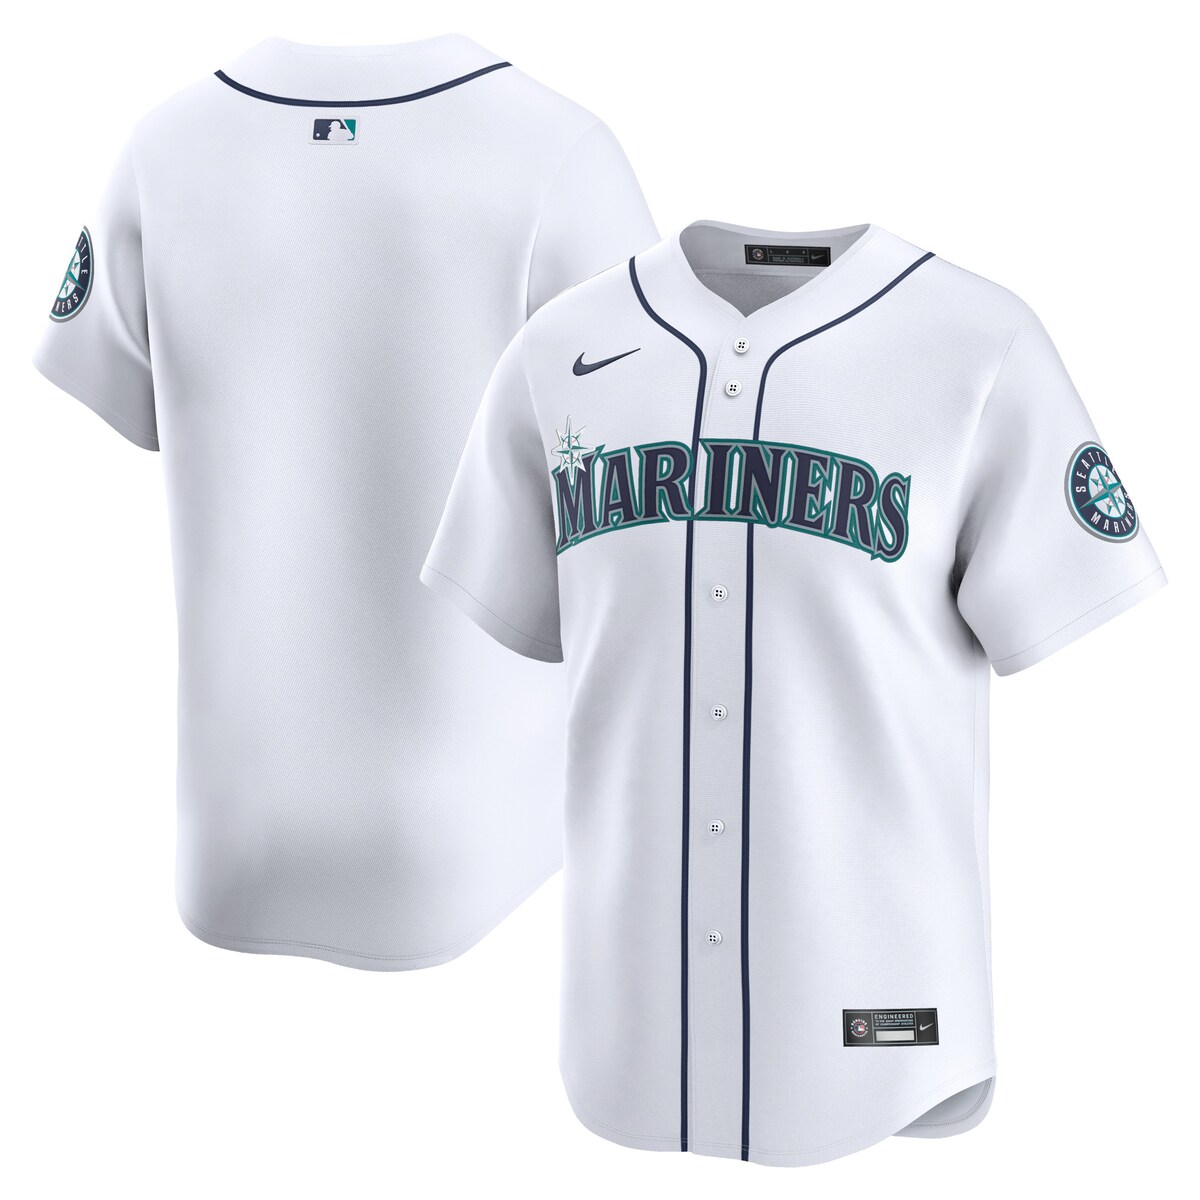 MLB }i[Y ~ebh jtH[ Nike iCL LbY zCg (2024 Nike Youth Limited Team Blank Jerseys - FTF NTP Master Style)